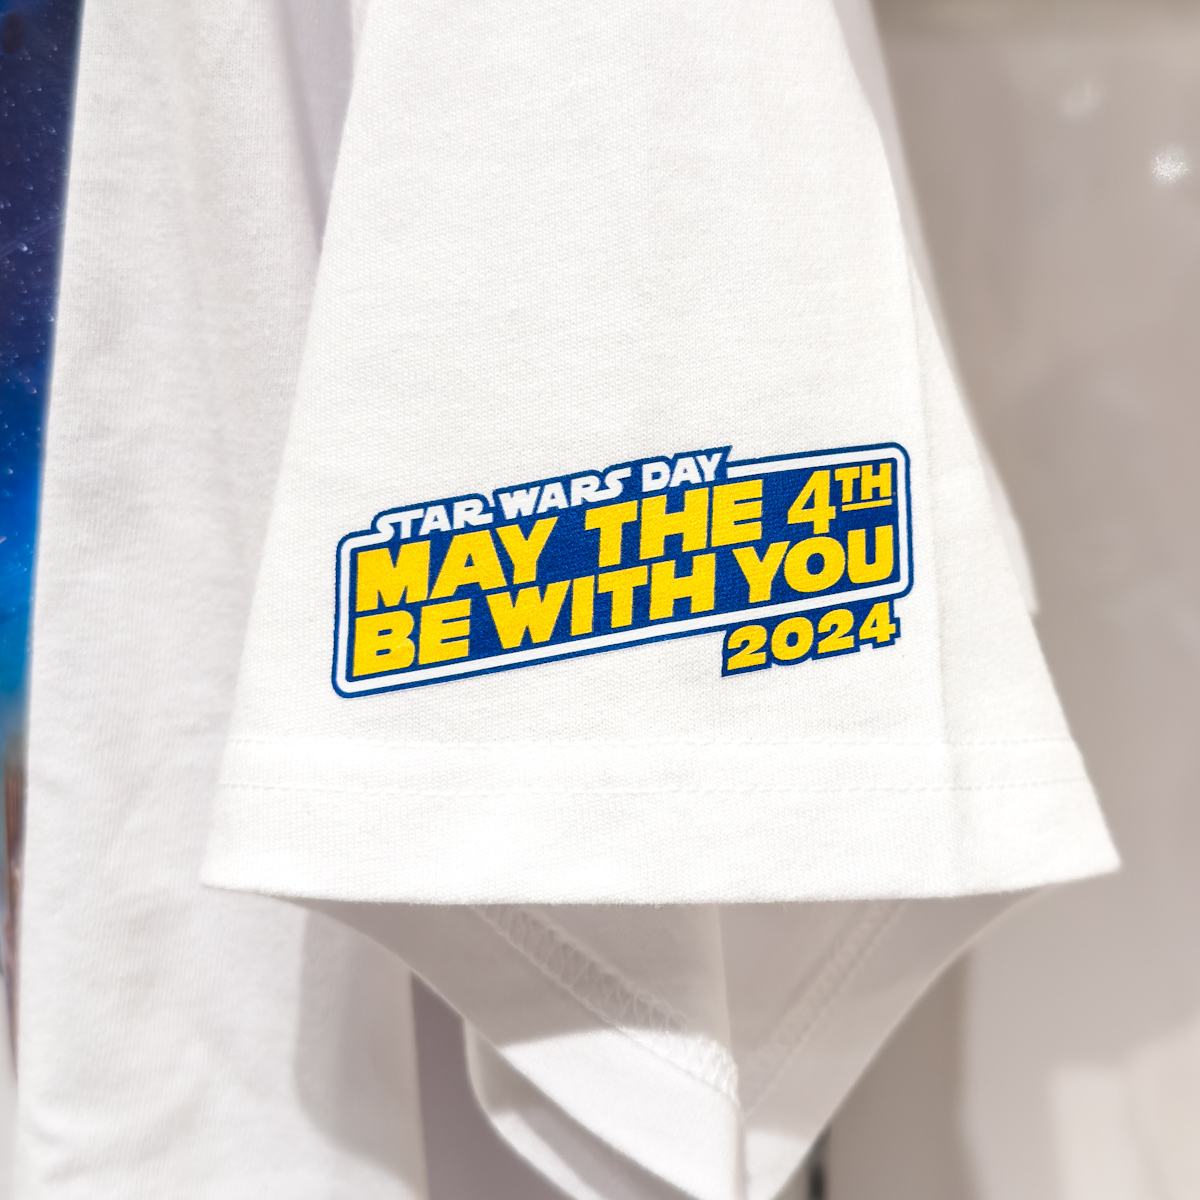 「May the Force be with you.」ロゴの無料プリントキャンペーンを実施